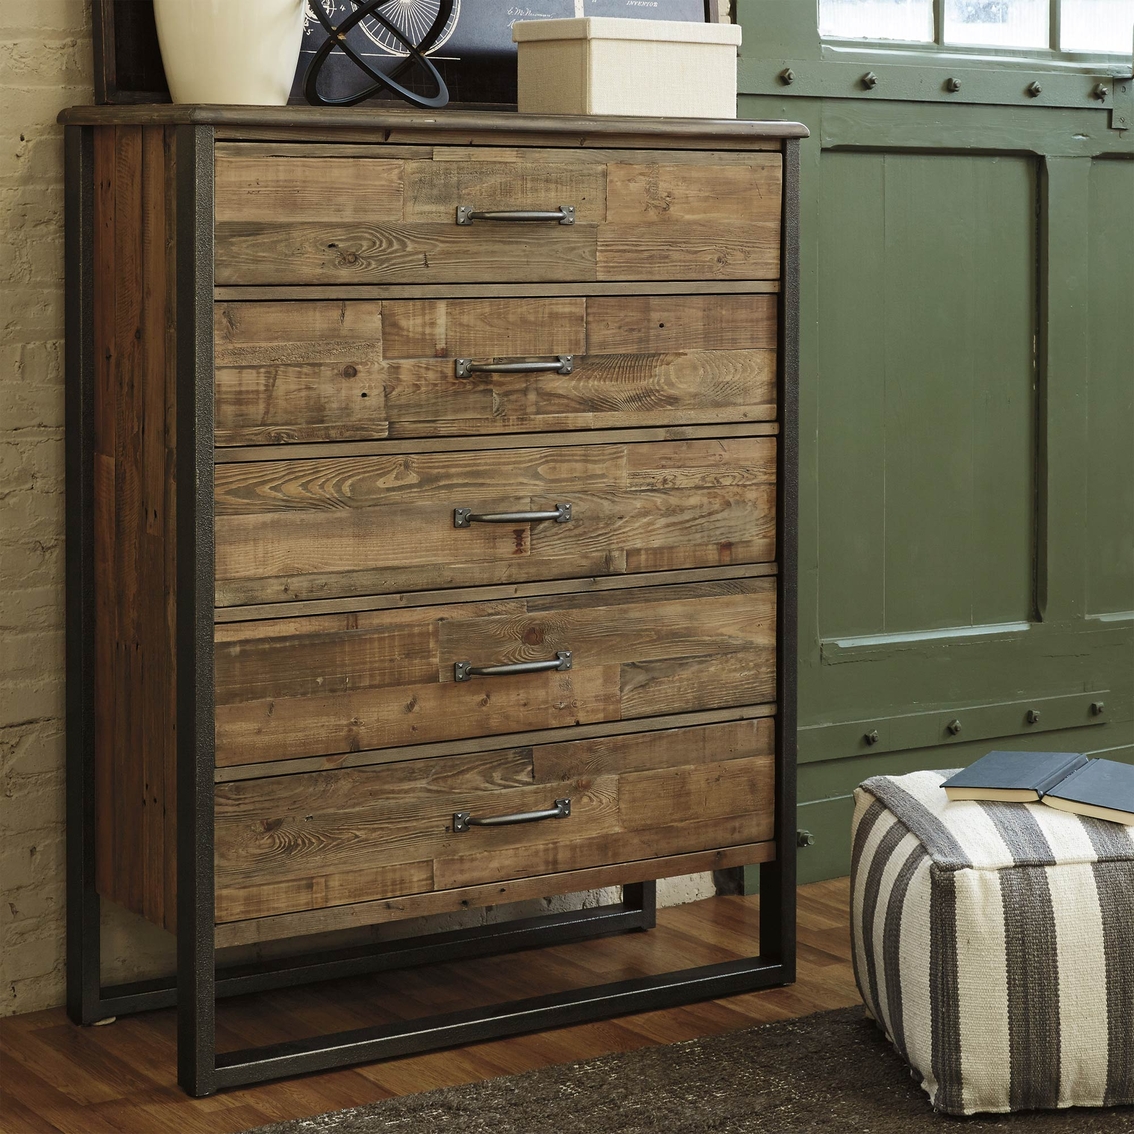 Signature Design by Ashley Sommerford Five Drawer Chest - Image 2 of 4